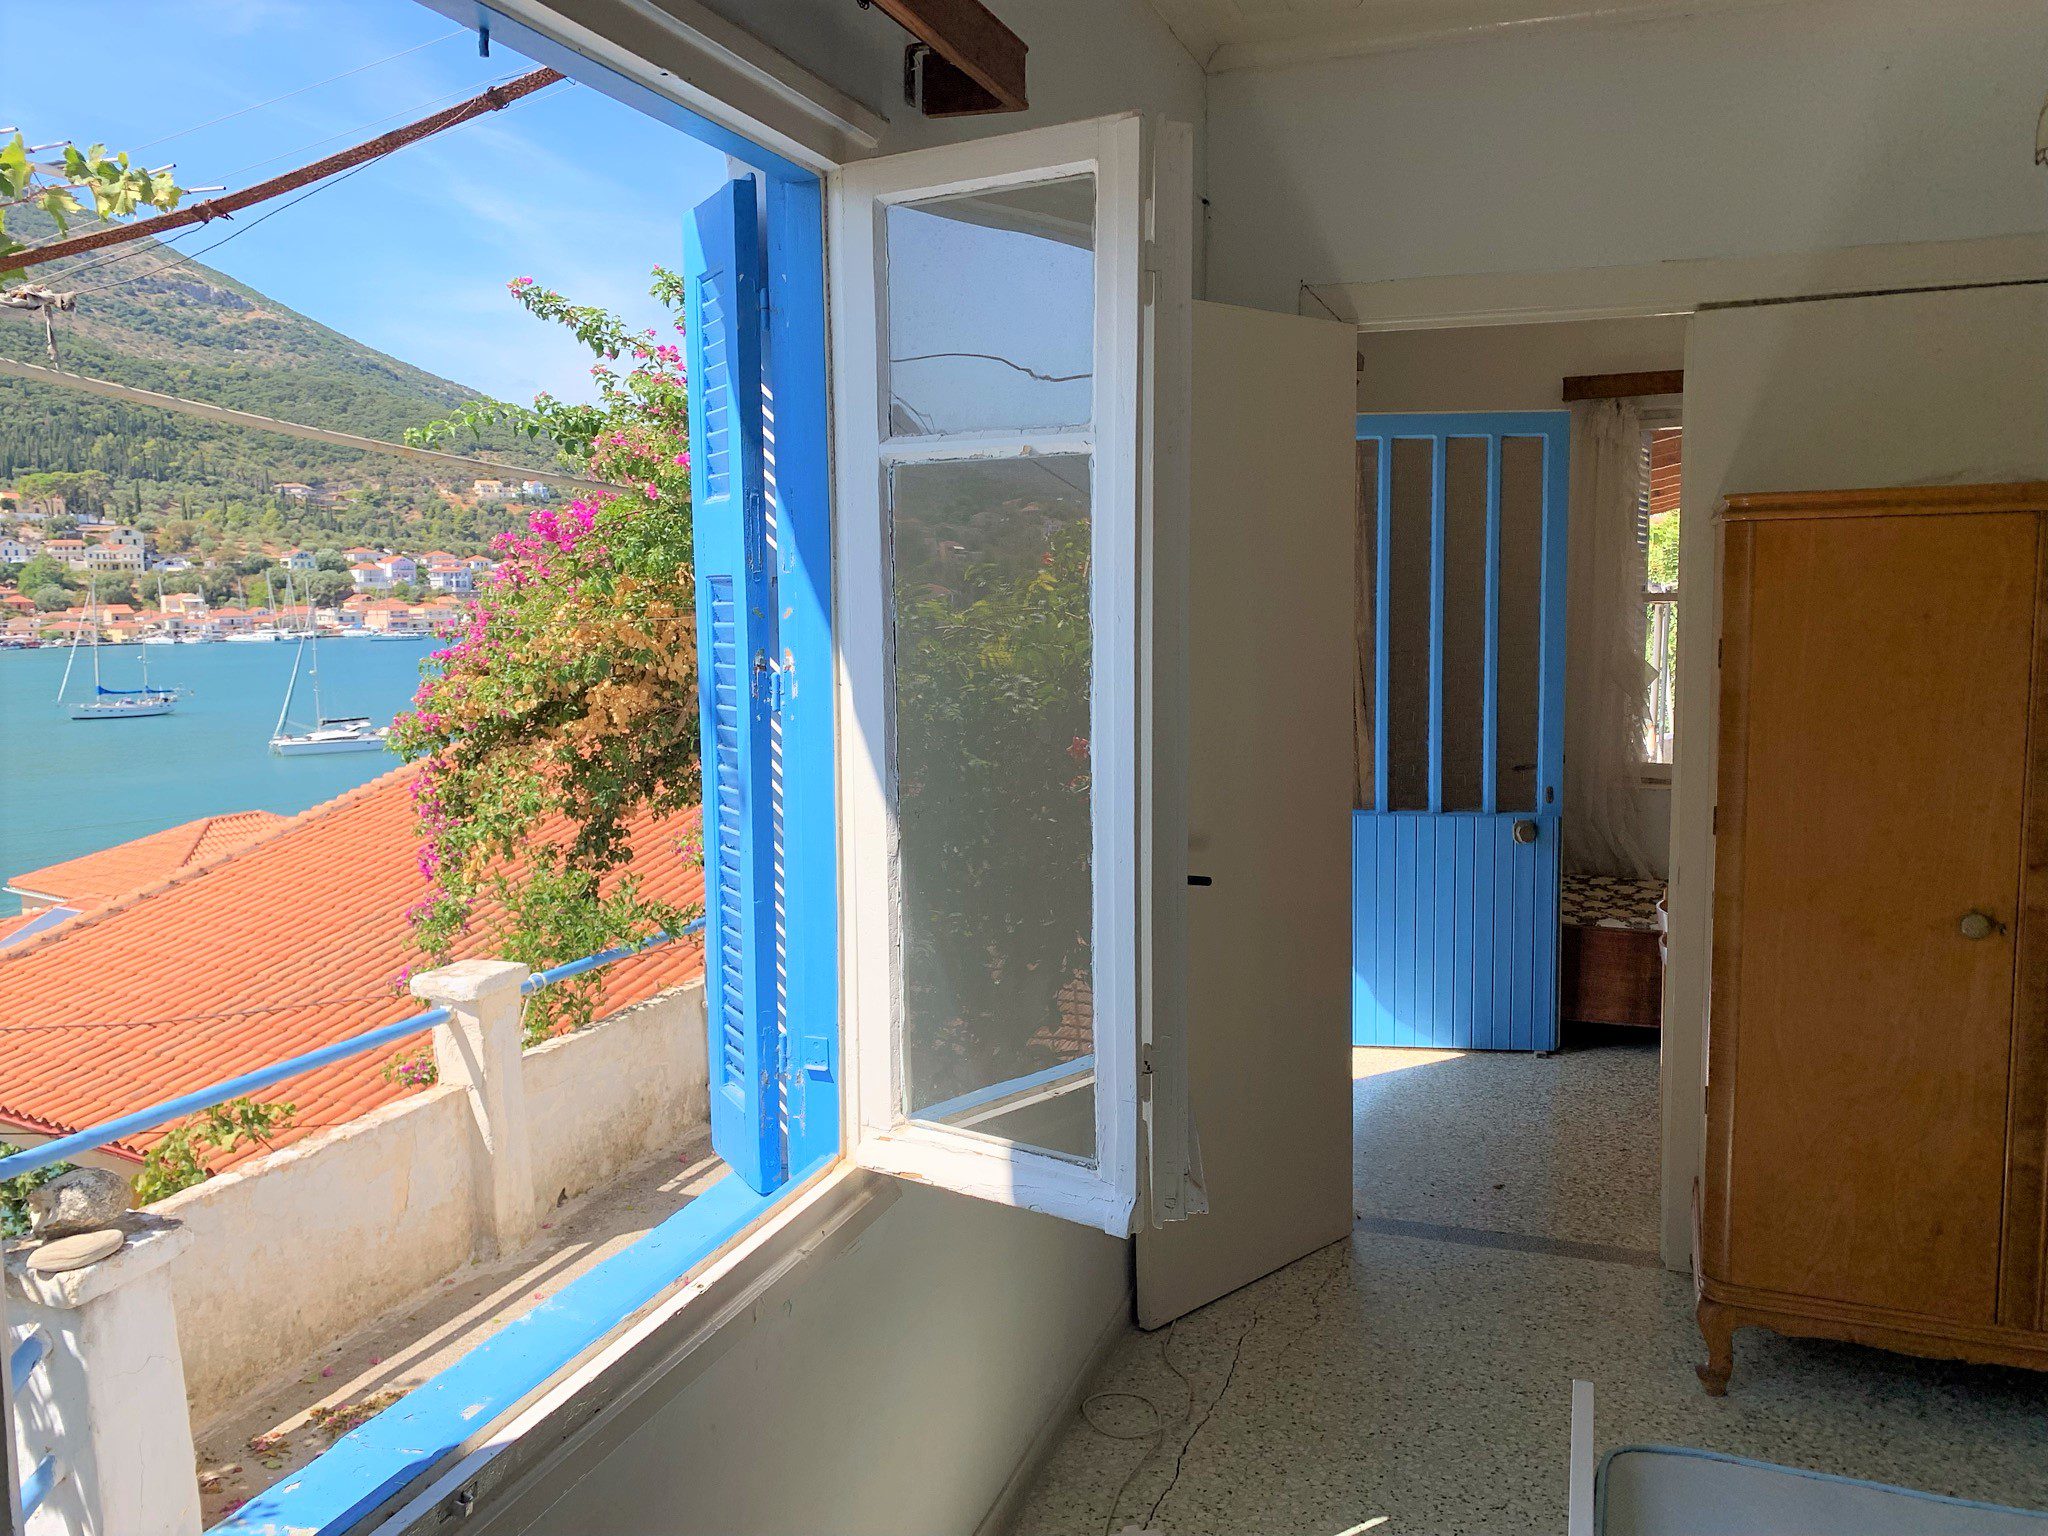 Bedroom and view from house for sale Ithaca Greece, Vathi